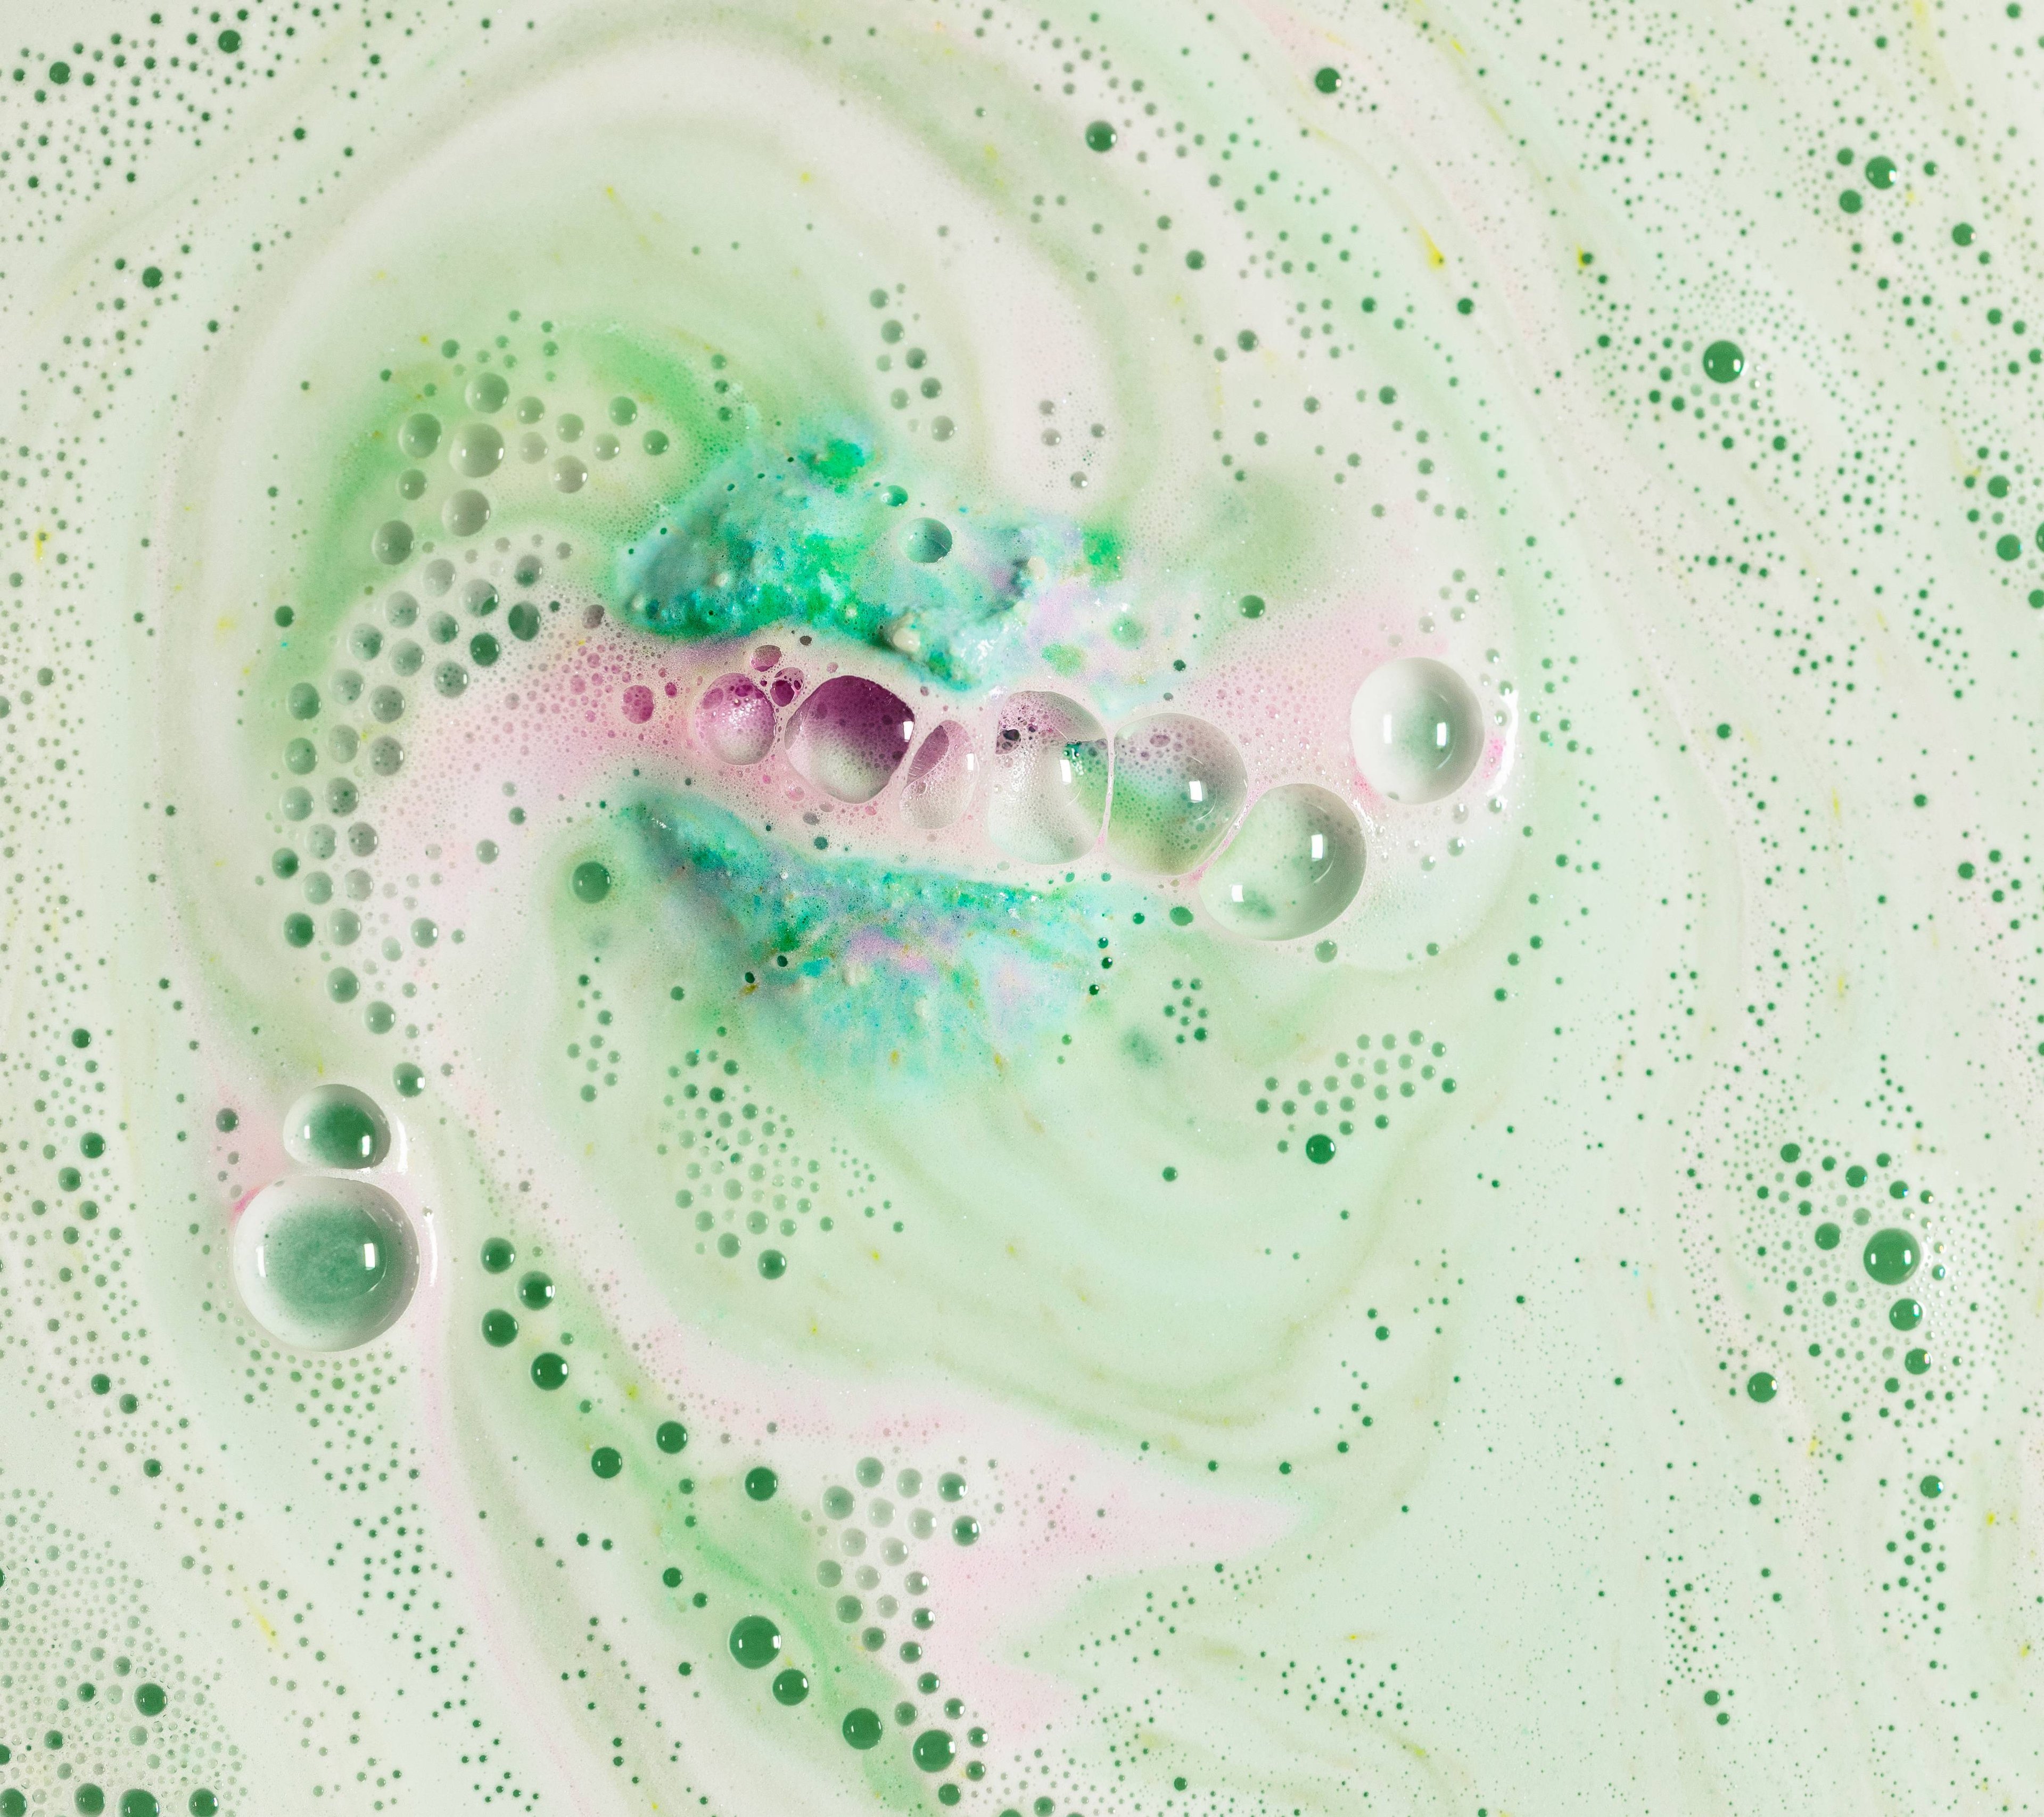 A spiral of pastel pink and green foam and bubbles emerge in a chain from a crack in the floating Lakes bath bomb.